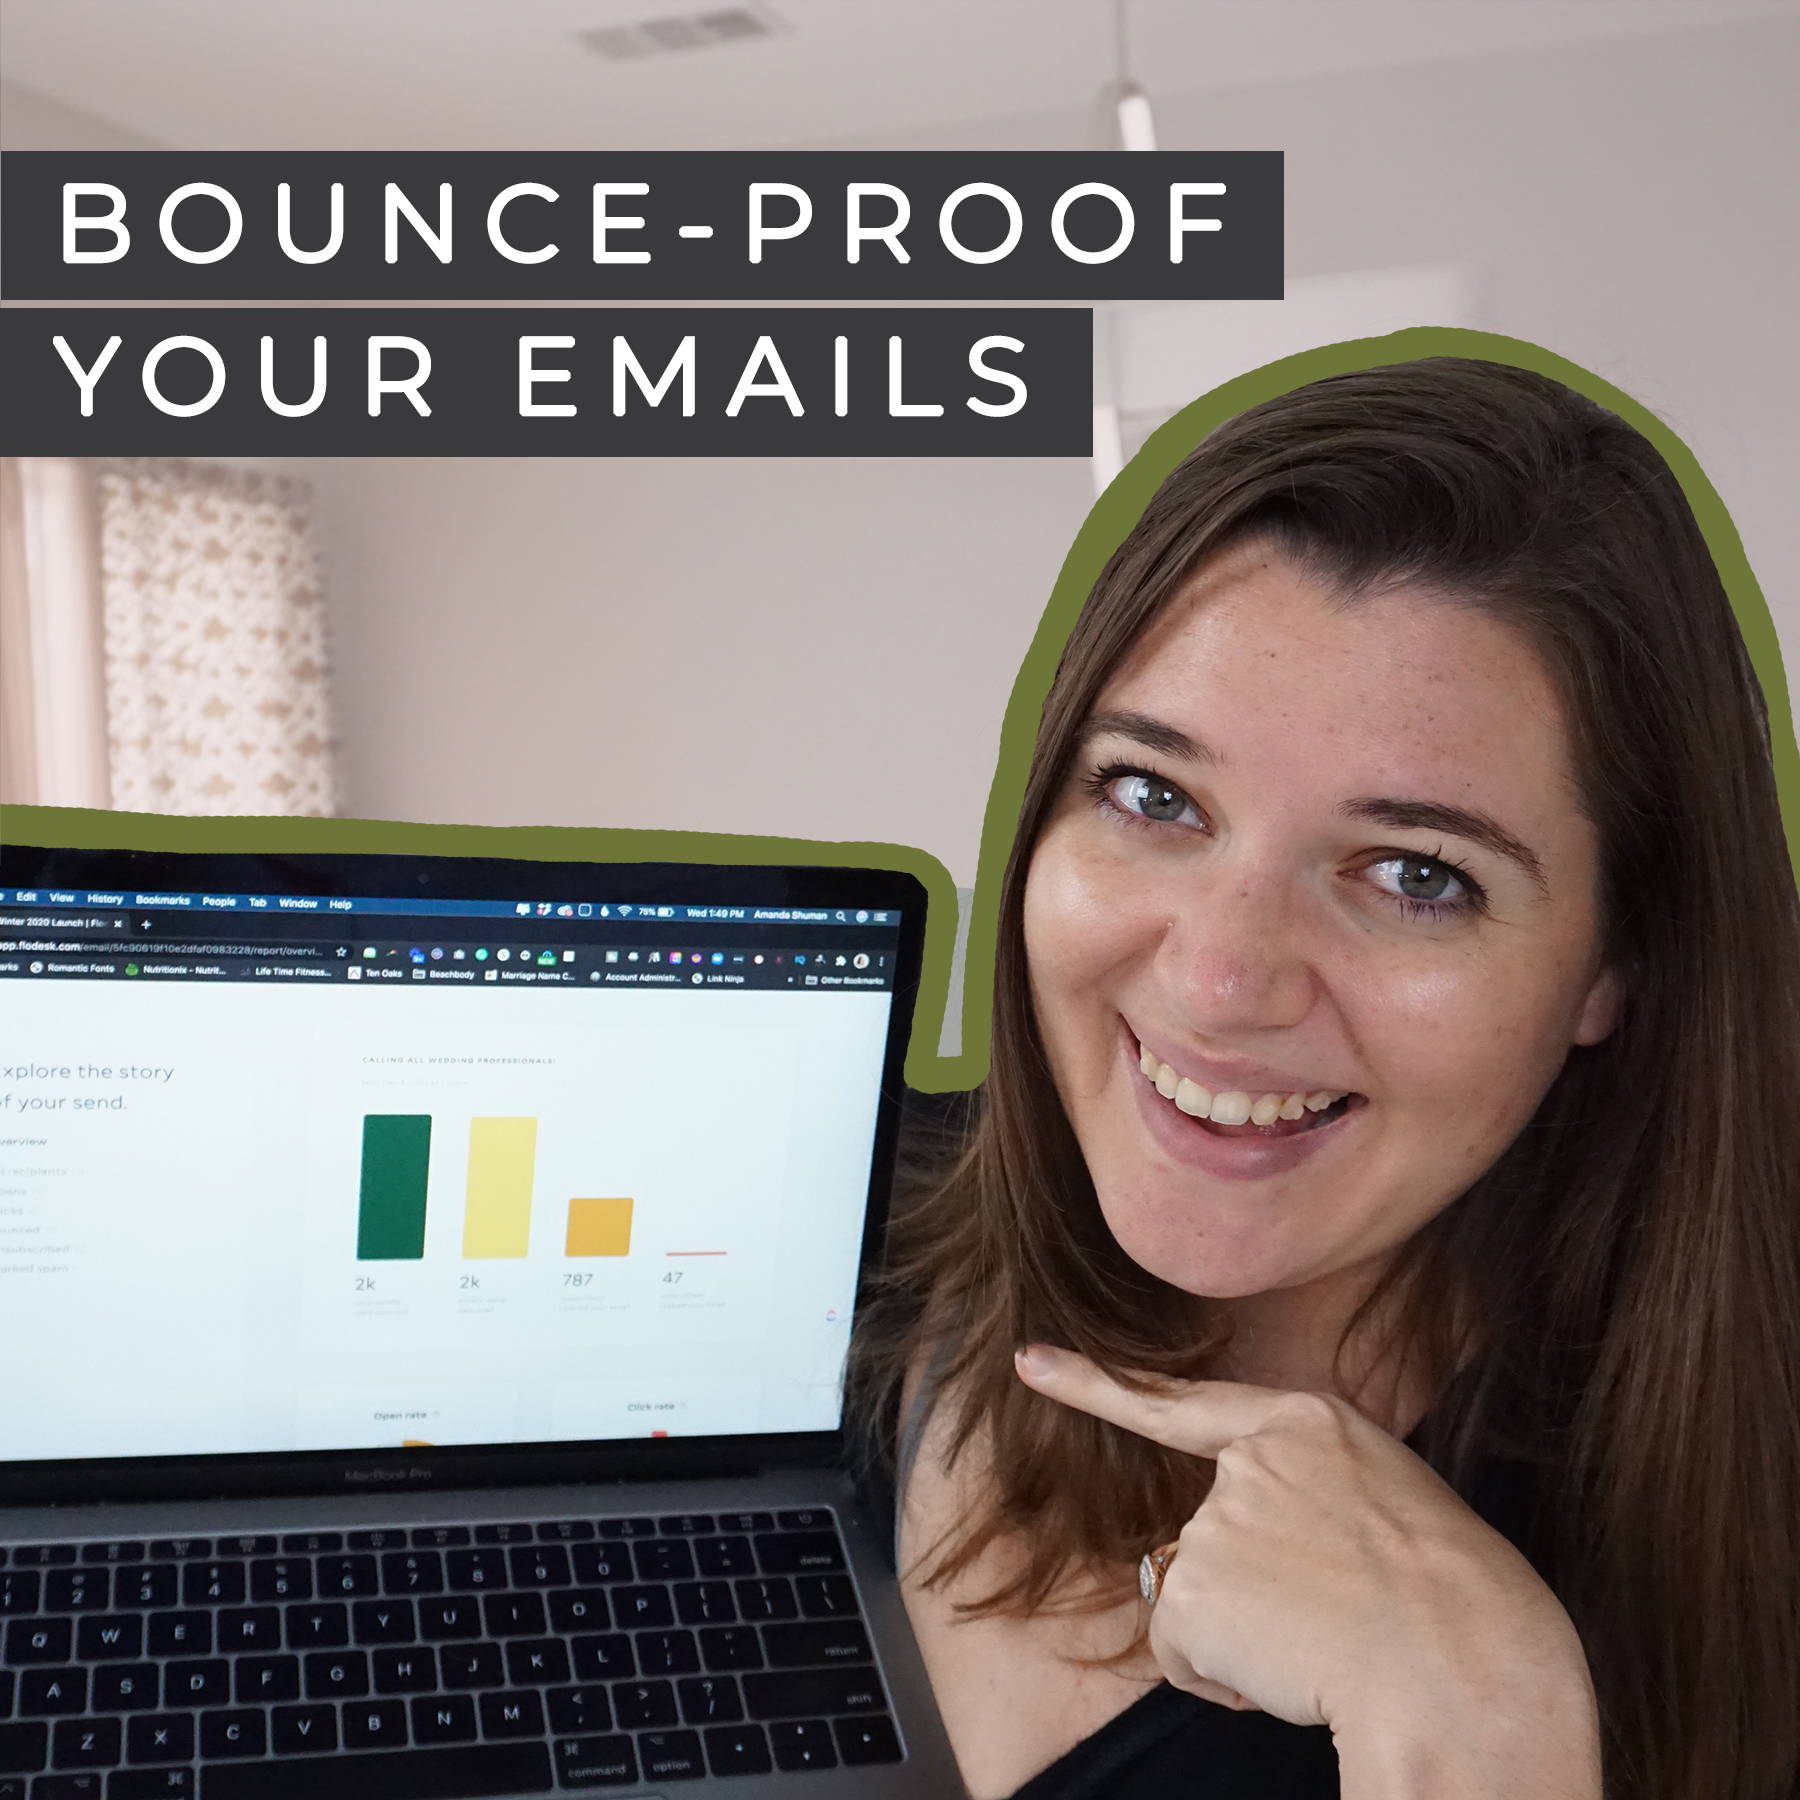 Learn how to bounce-proof your emails to ensure your email marketing plan is strategic.